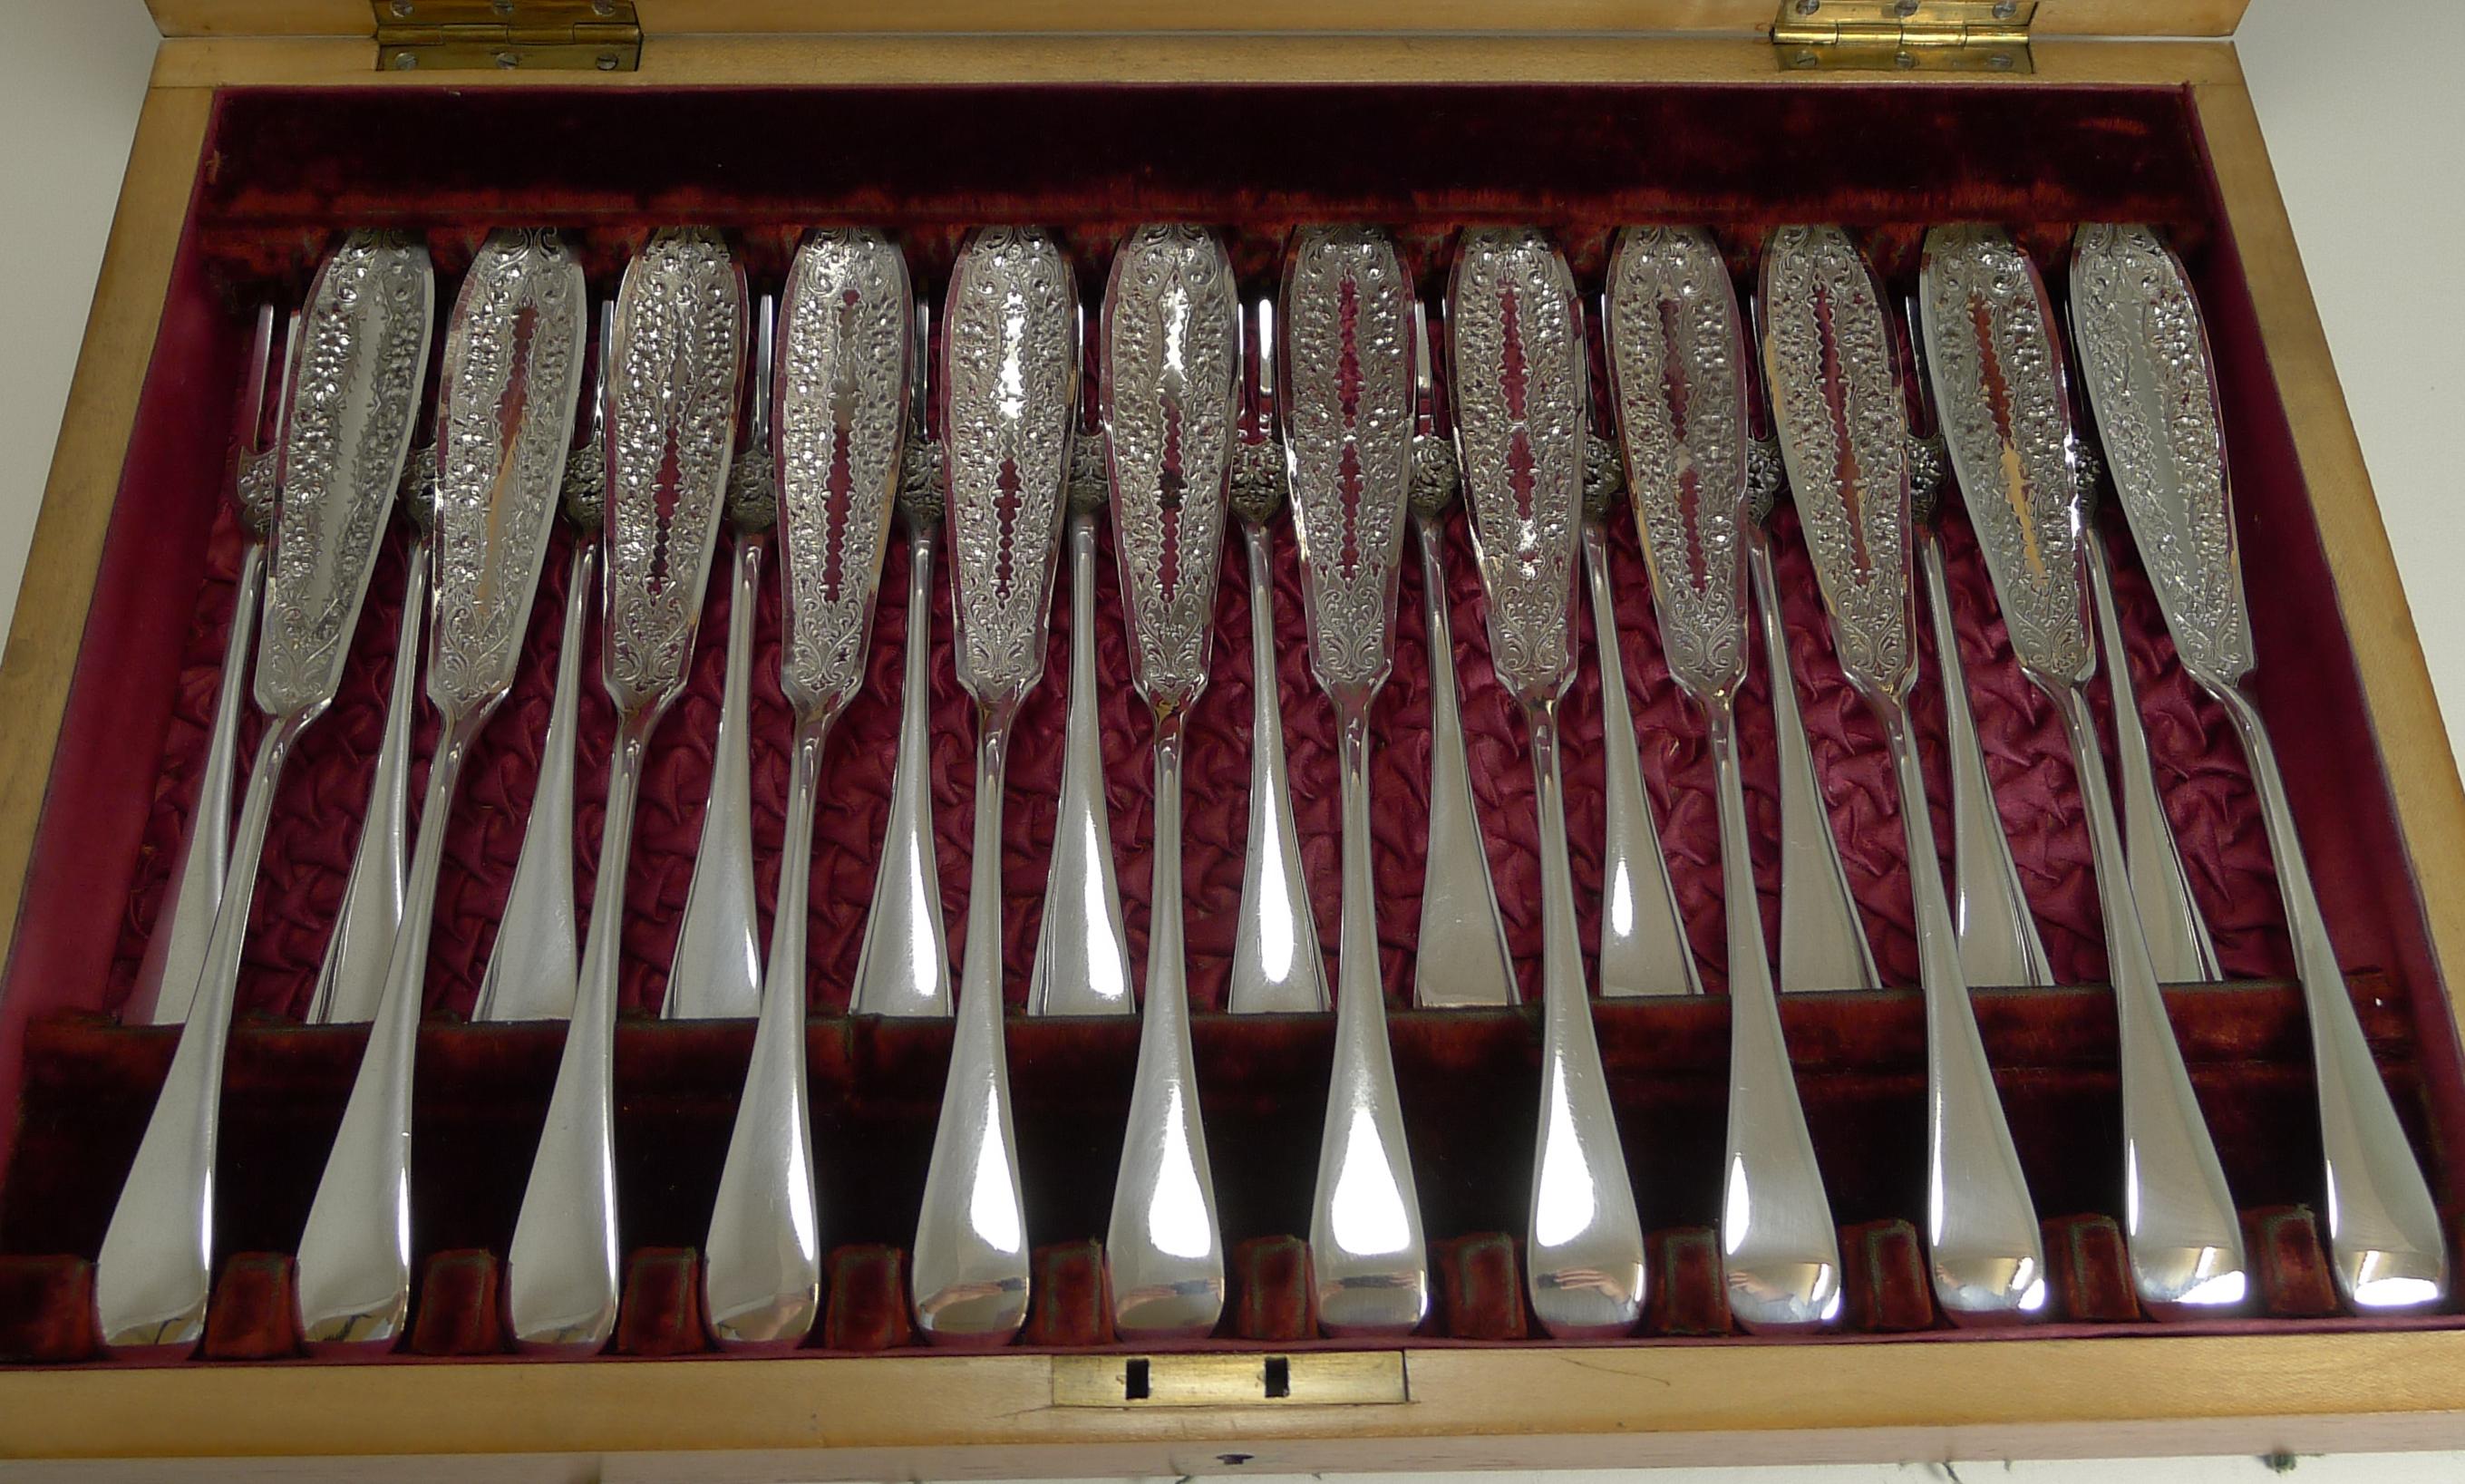 A fabulous and very grand set of fish knives and forks for twelve complete with the matching fish servers fitted inside the lid.

The set is complete and comes in the original Mahogany presentation case inlaid to the lid. The interior is a joy,